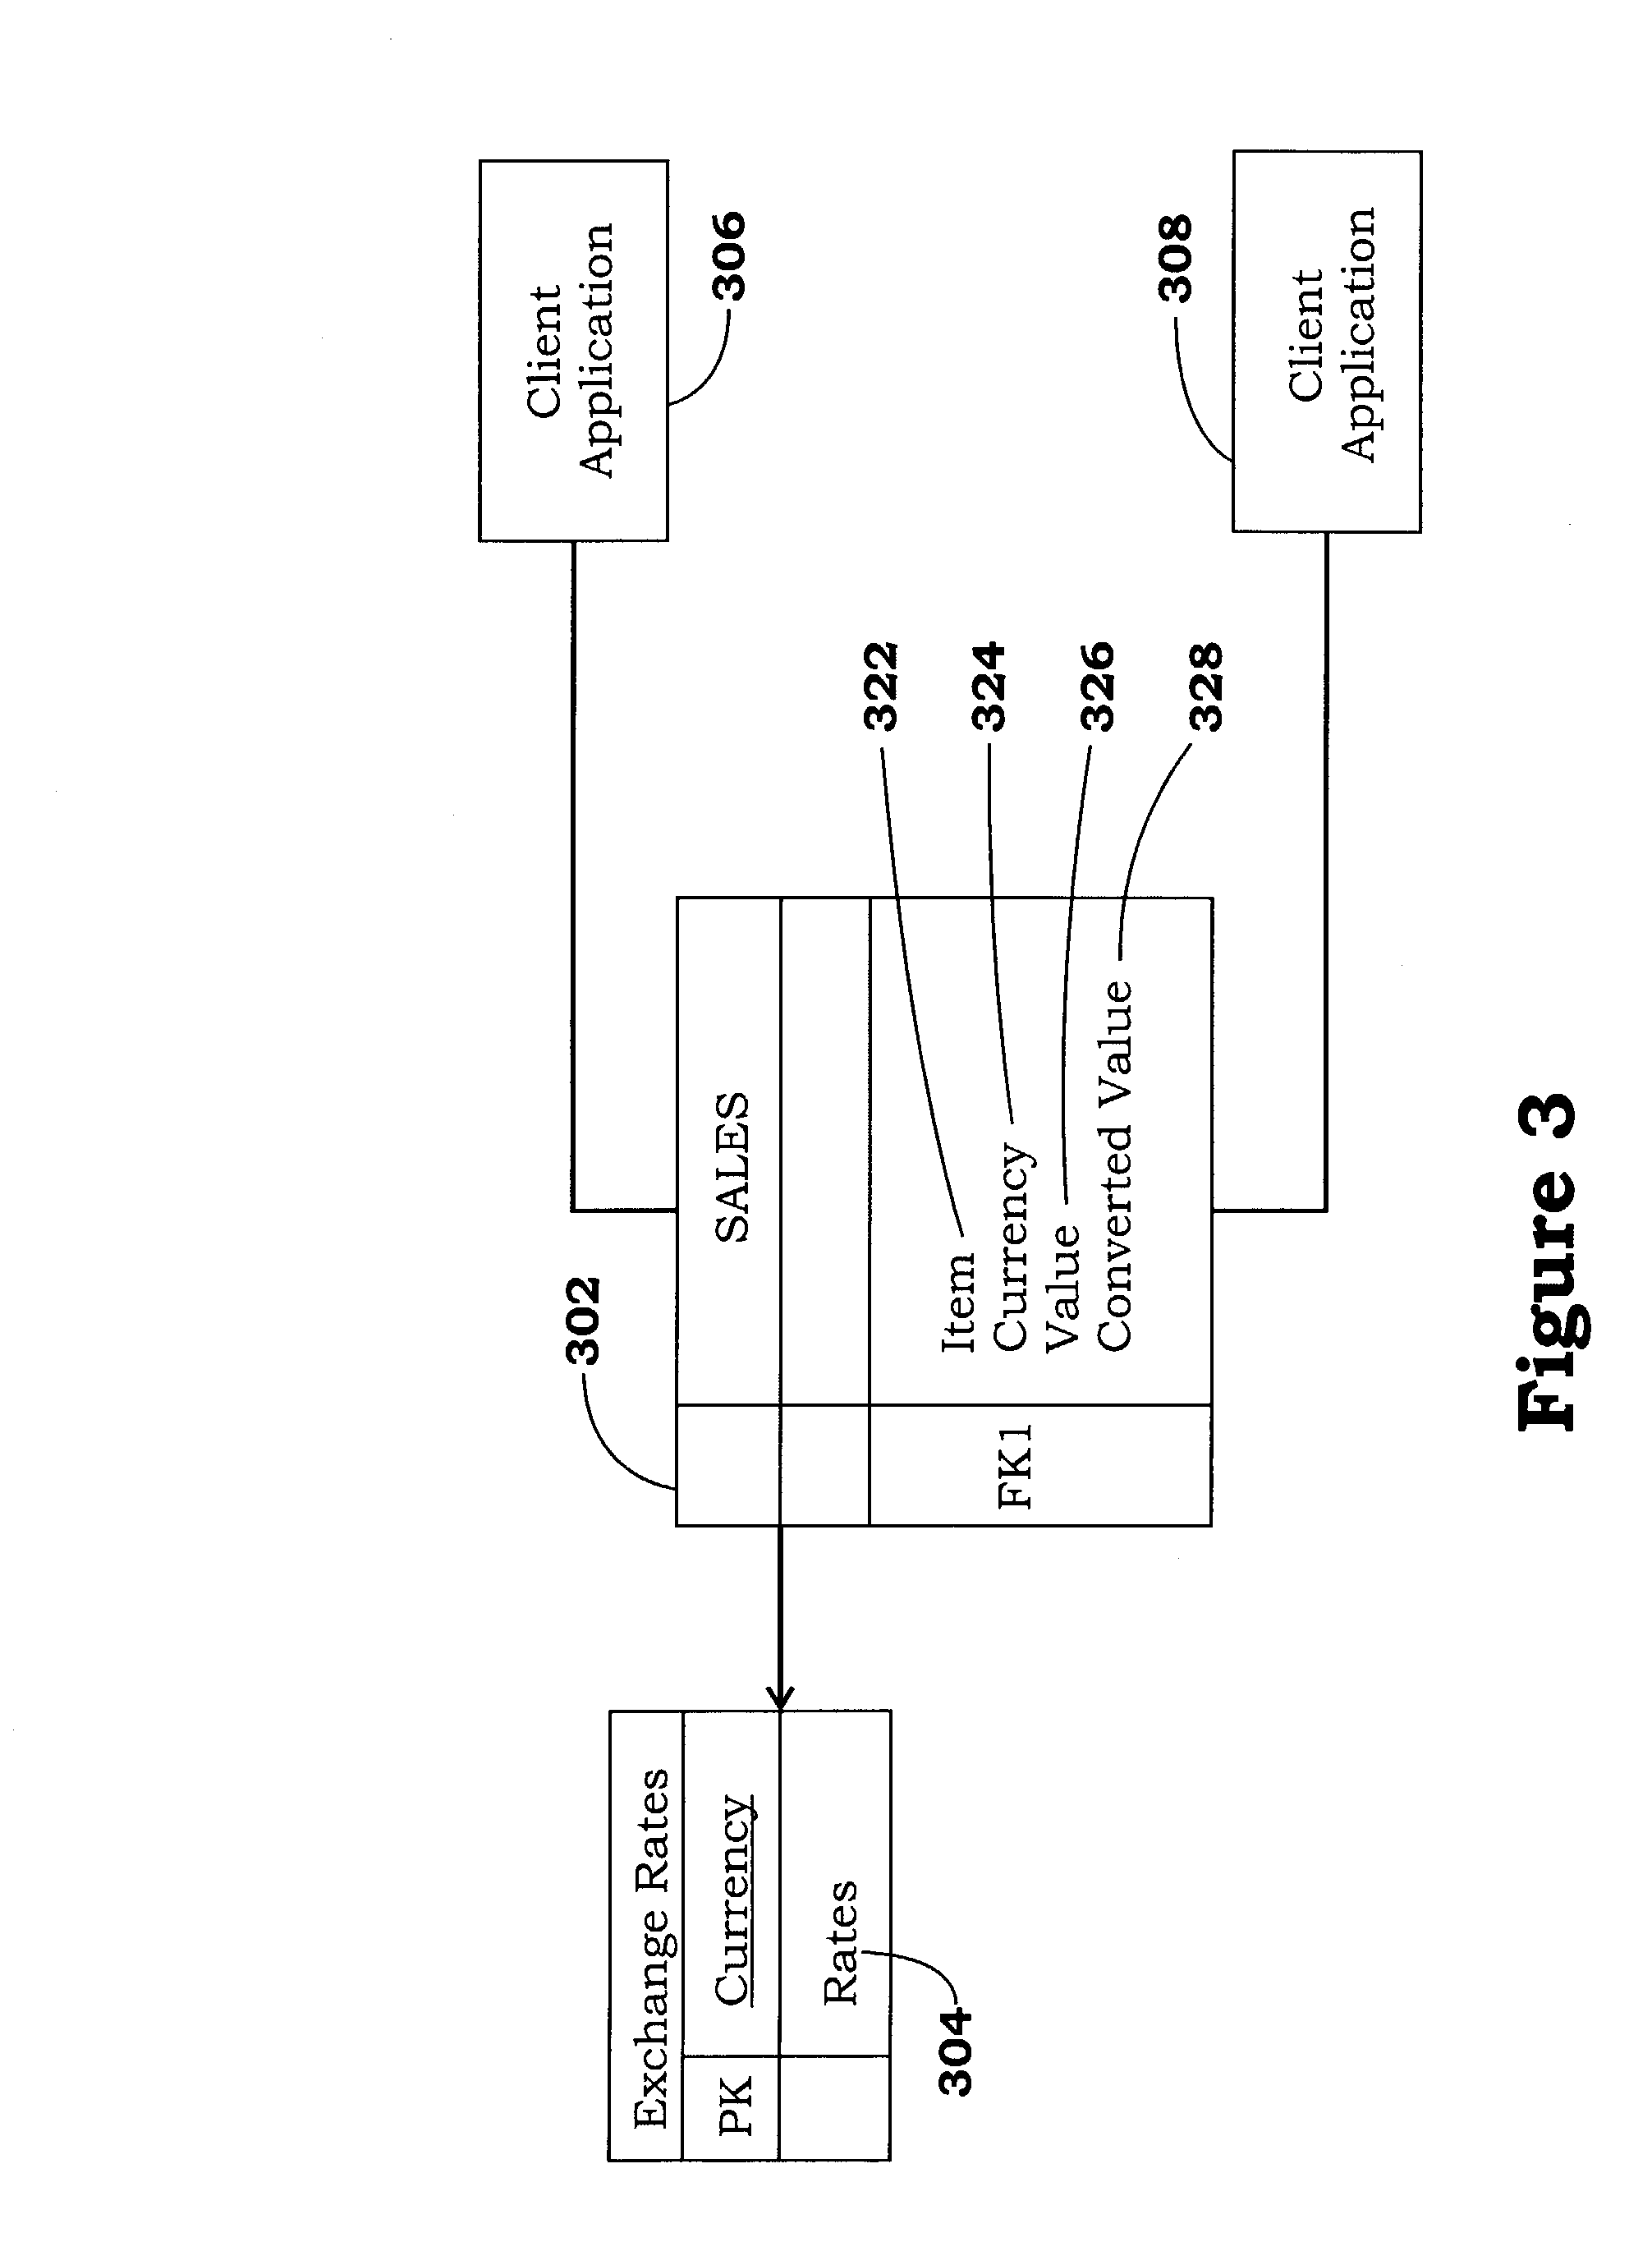 Method and apparatus for archiving data in a relational database system